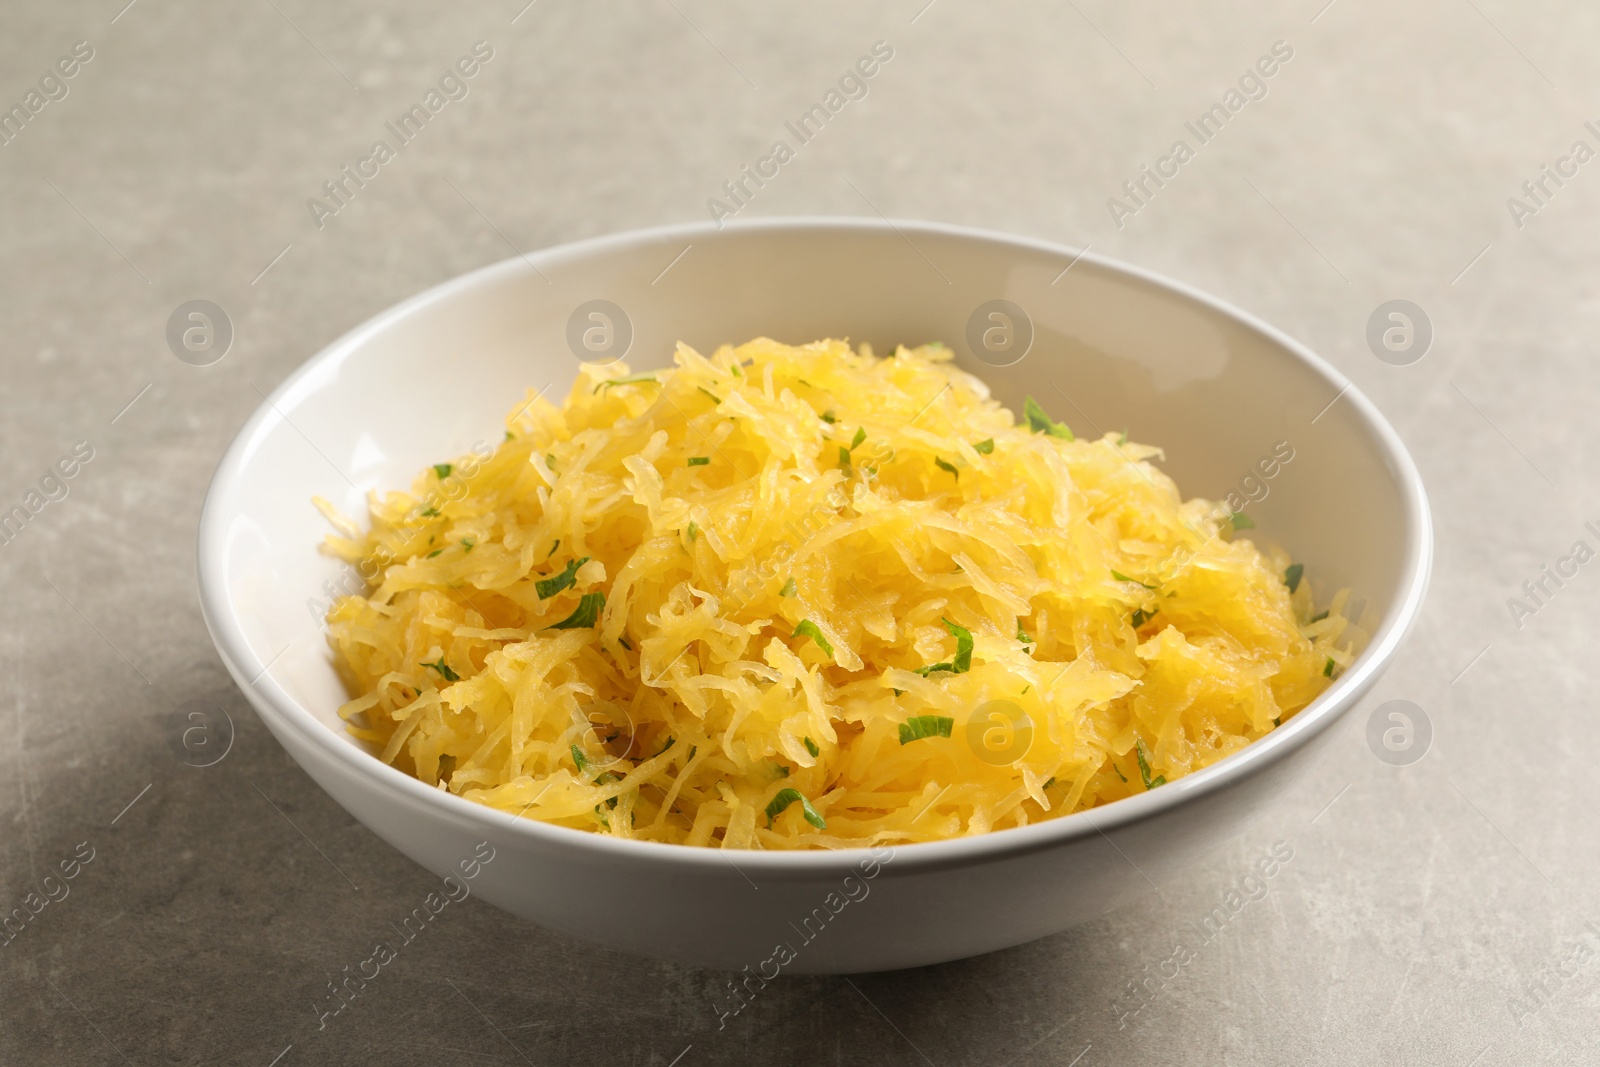 Photo of Bowl with cooked spaghetti squash on table